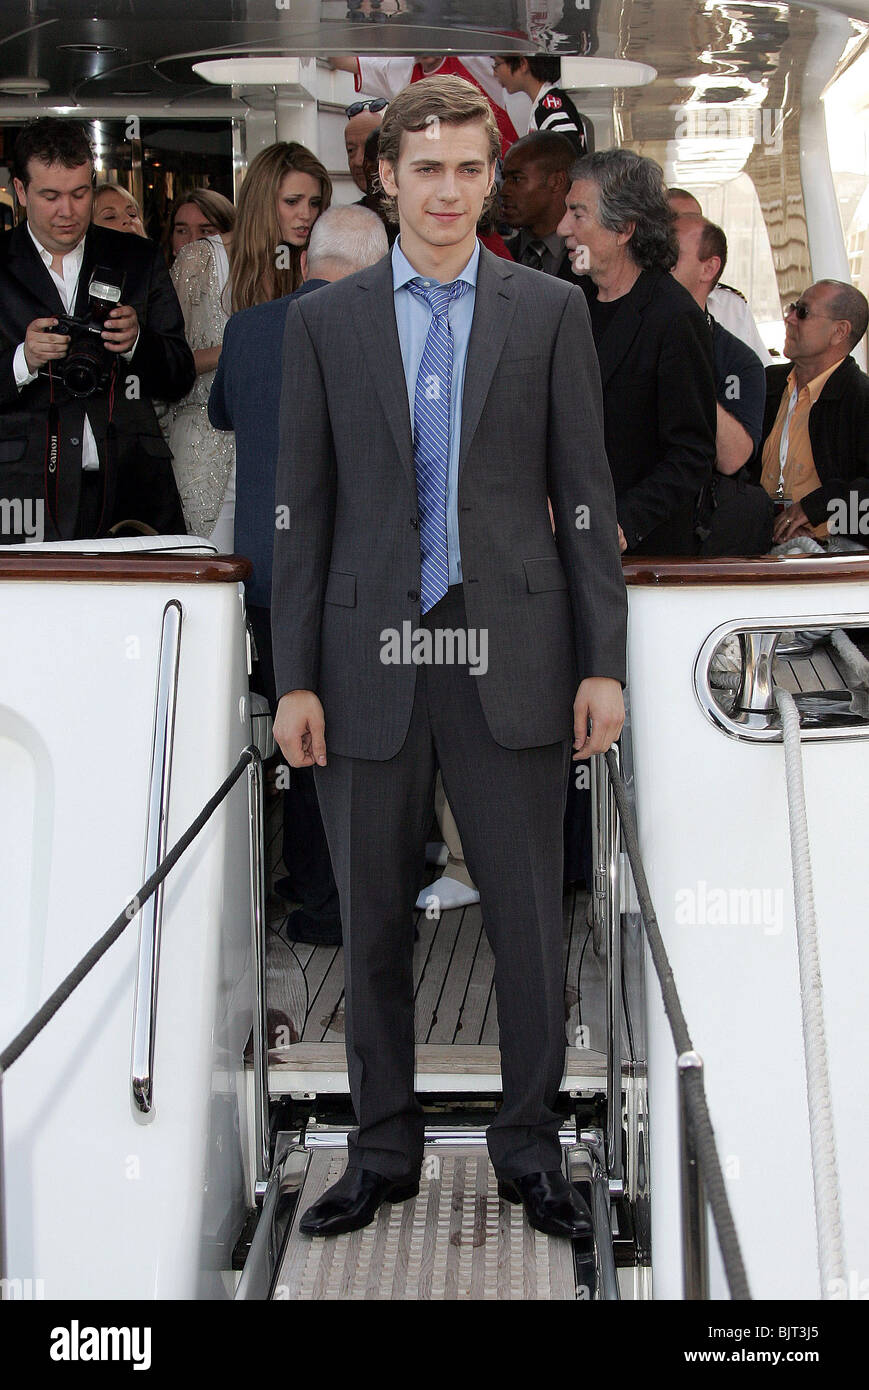 HAYDEN CHRISTENSEN CANNES FILM FESTIVAL 2005 CANNES FRANCE 14 May 2005 Stock Photo